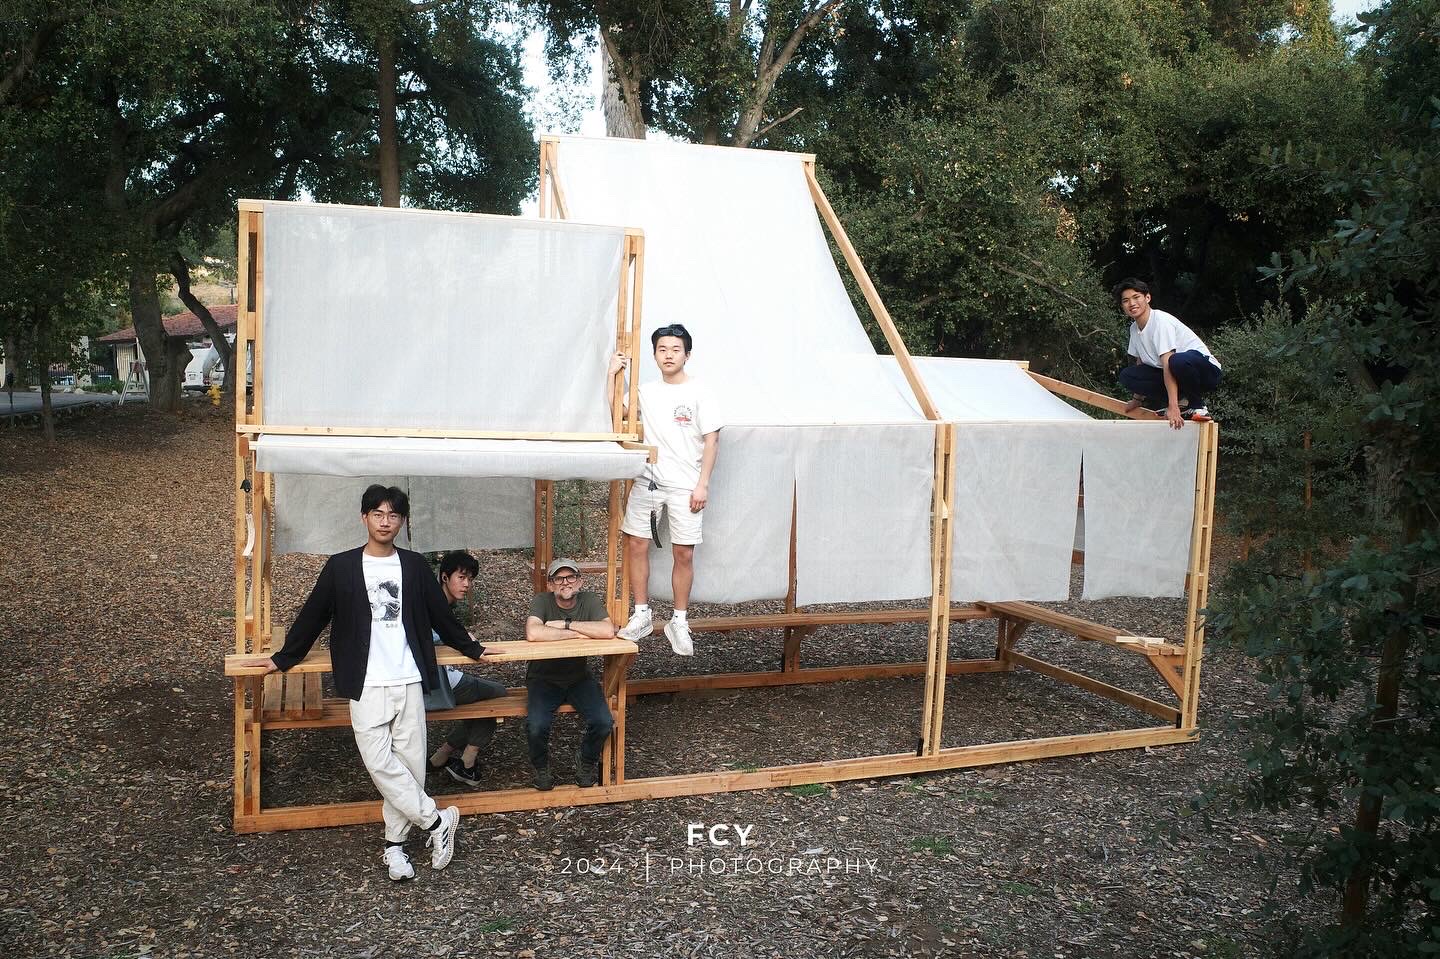 Michael Fu and his team pose with the completed Fabric Pavilion